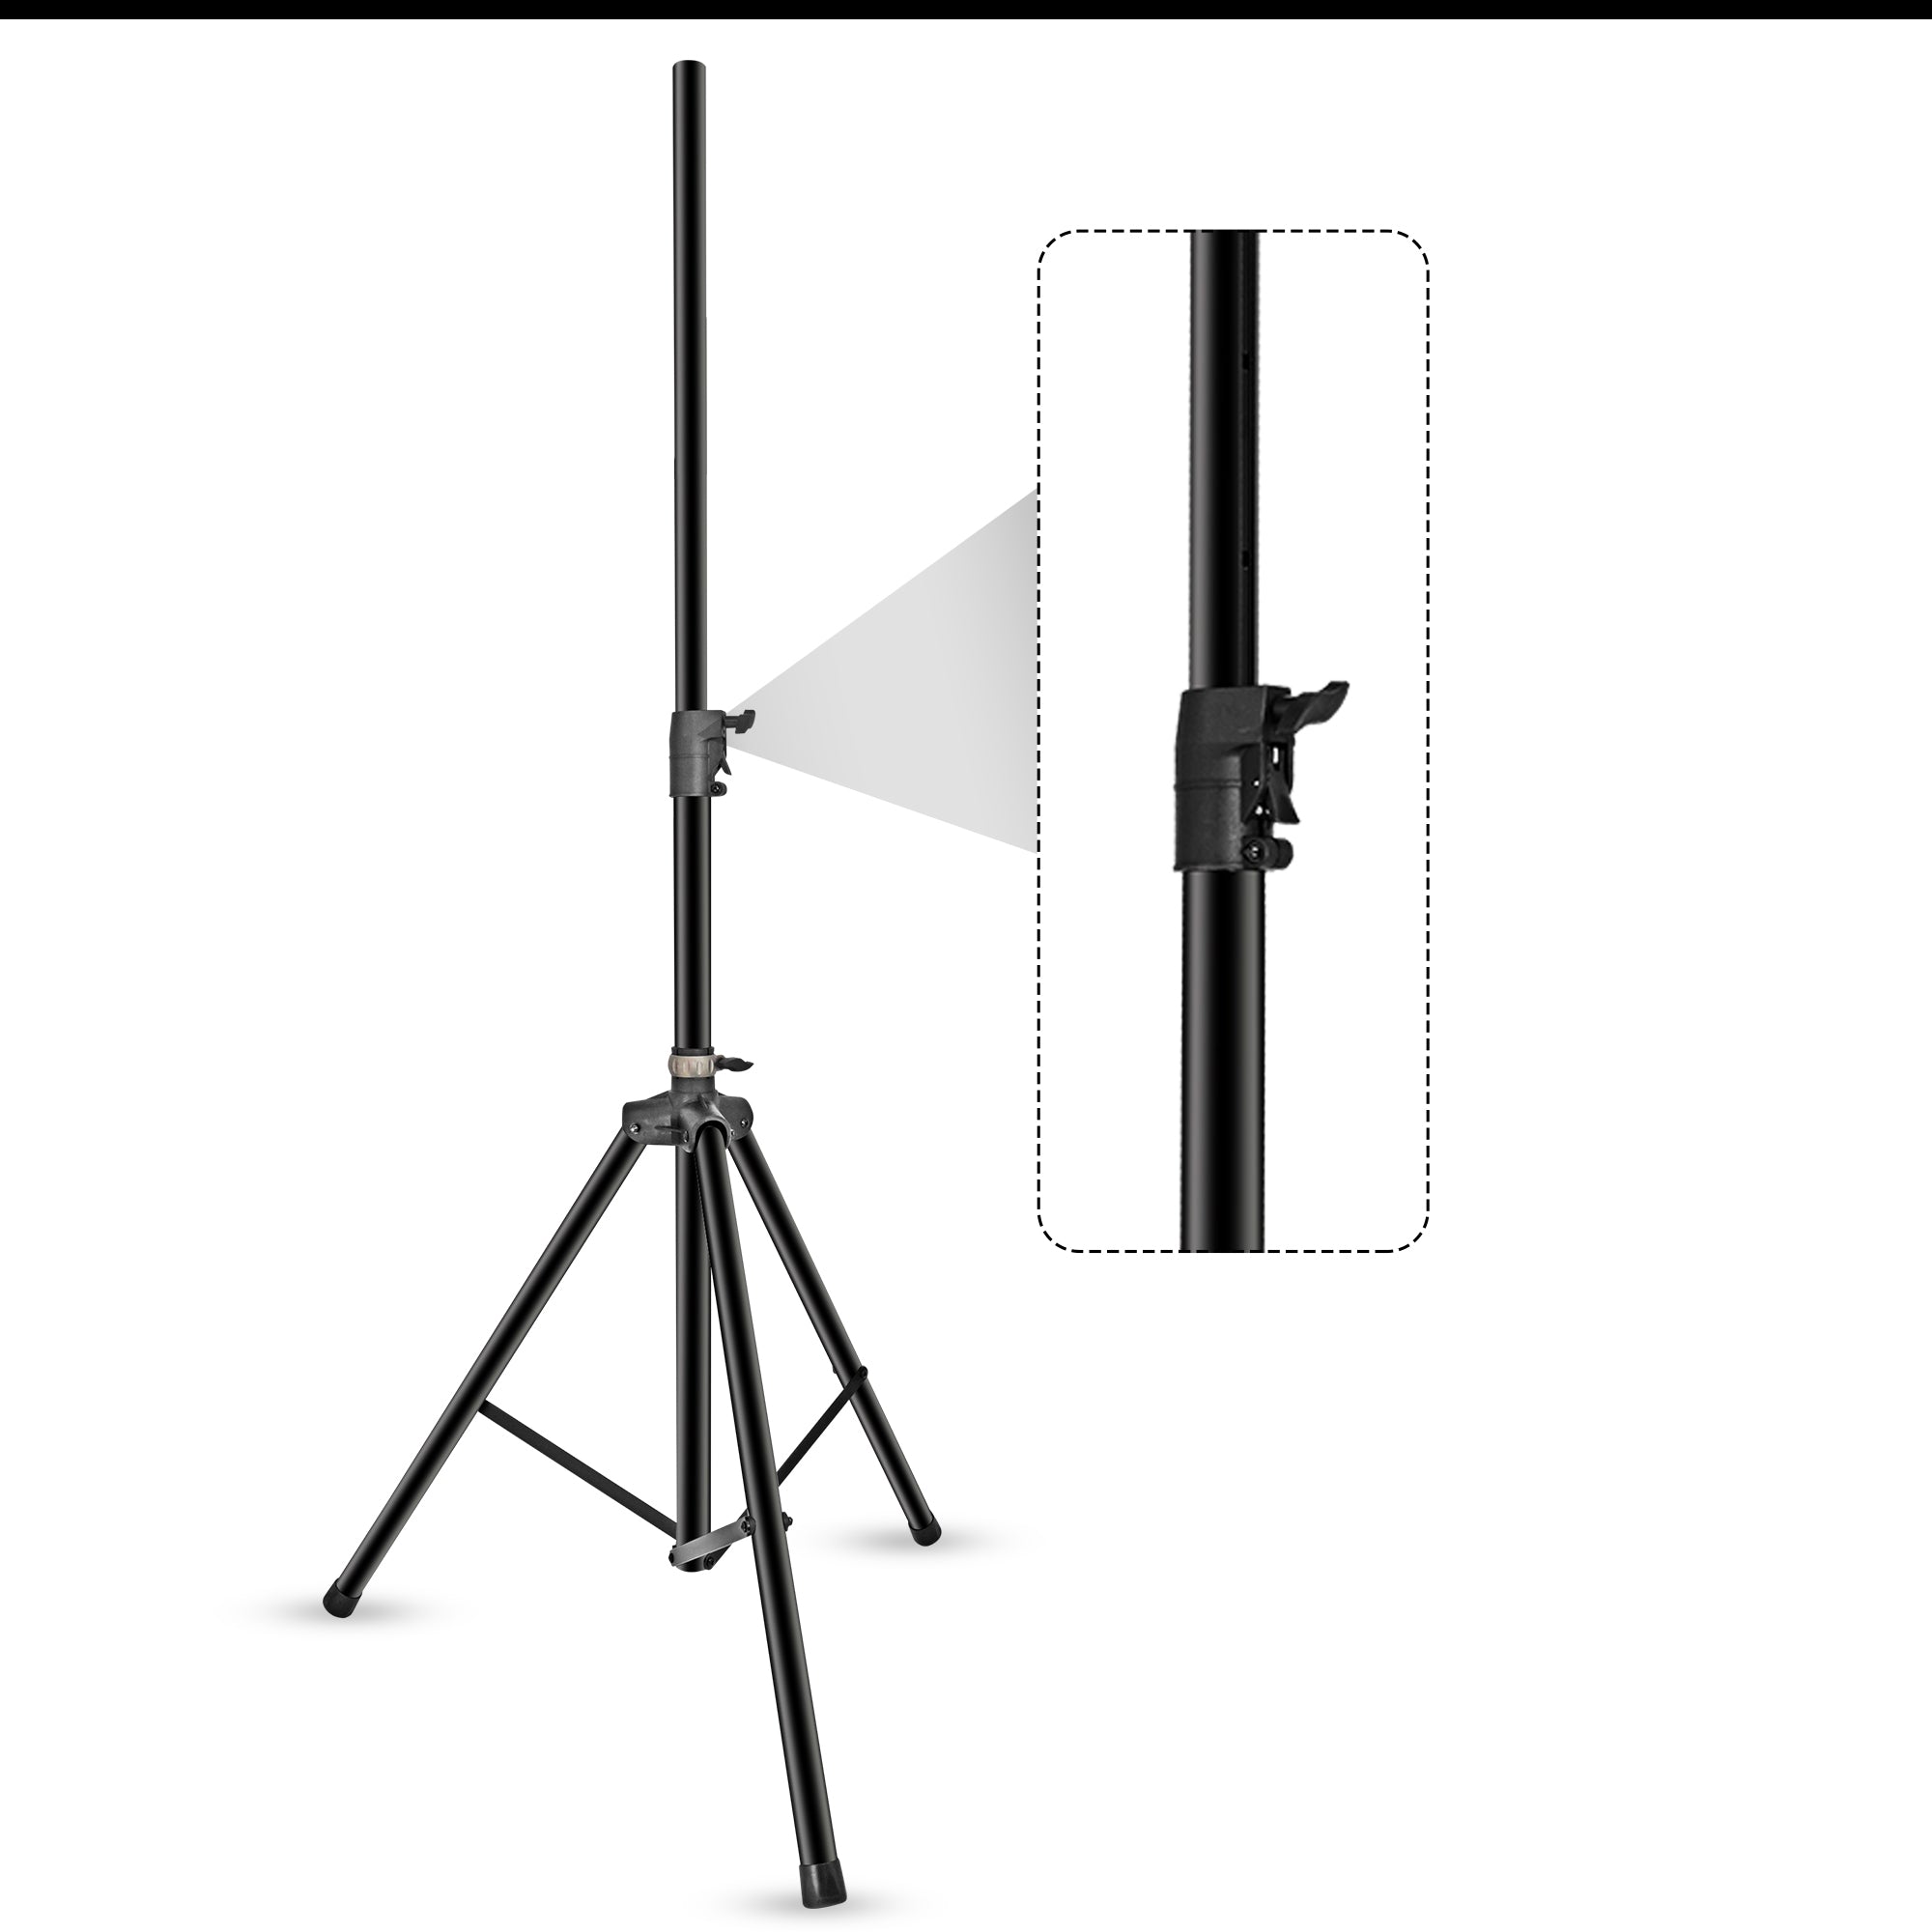 5 Core Heavy Duty Speaker Stand • Aluminum Tripod w Air Cushion Lowering • Height Adjustable